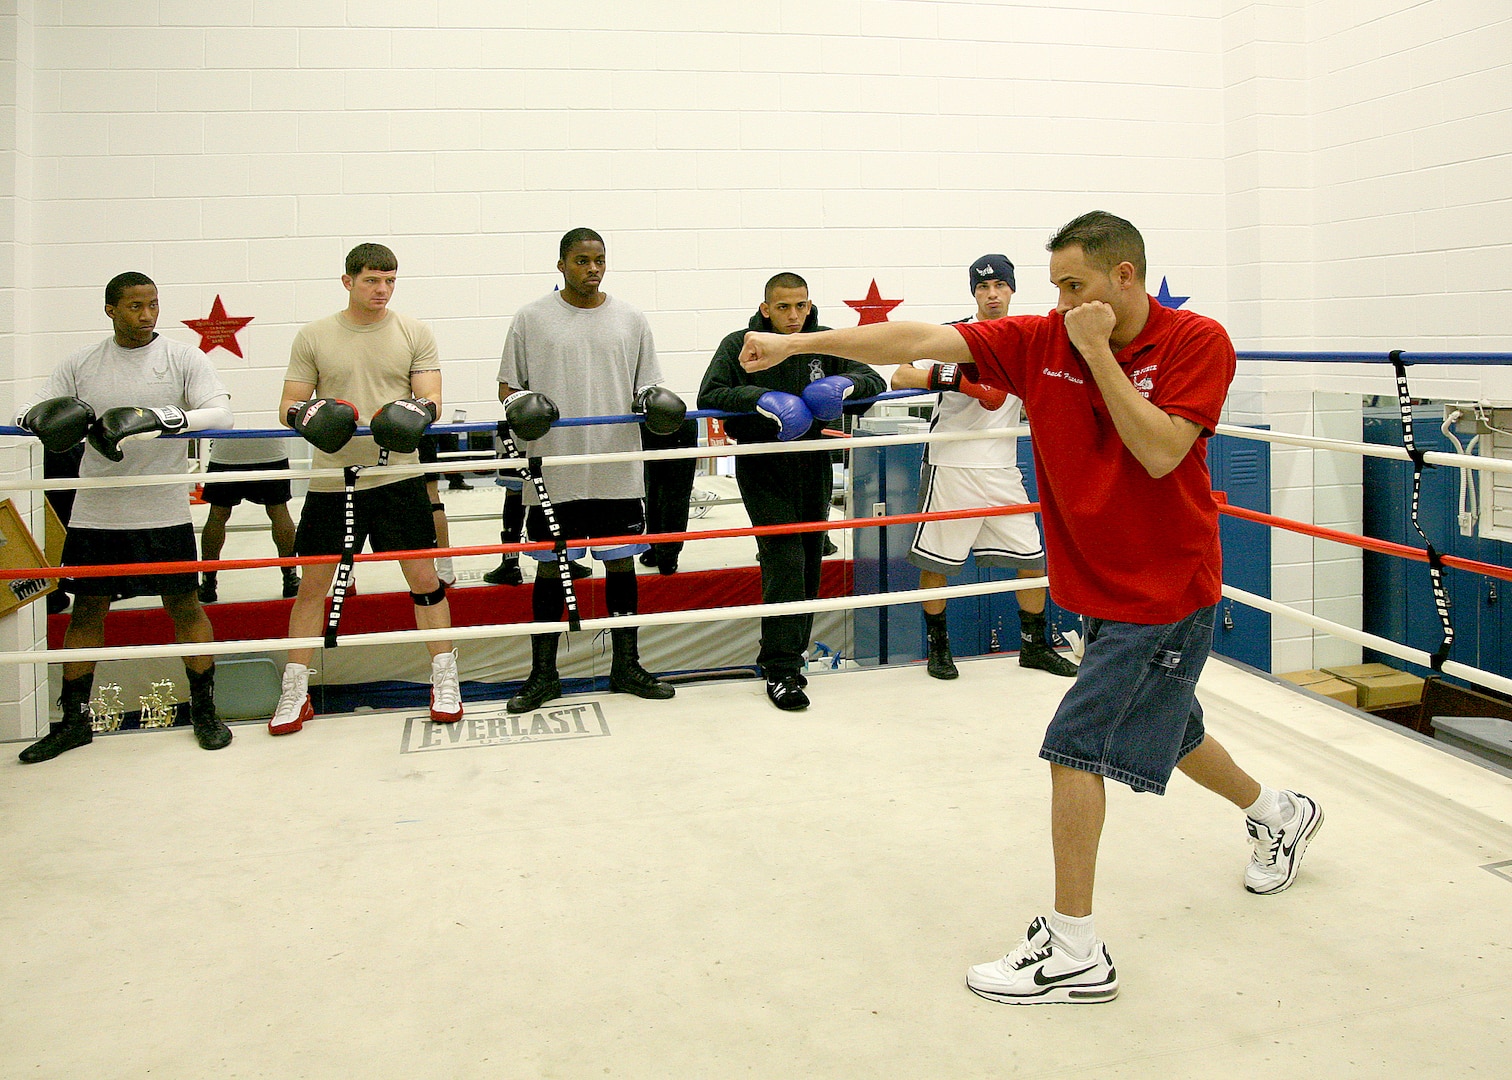 3/24/2009 - Air Force boxing coach Steven Franco demonstrates a proper striking technique in front of 11 Air Force boxing camp members at the Bennett Fitness Center. (USAF photo by Robbin Cresswell) 